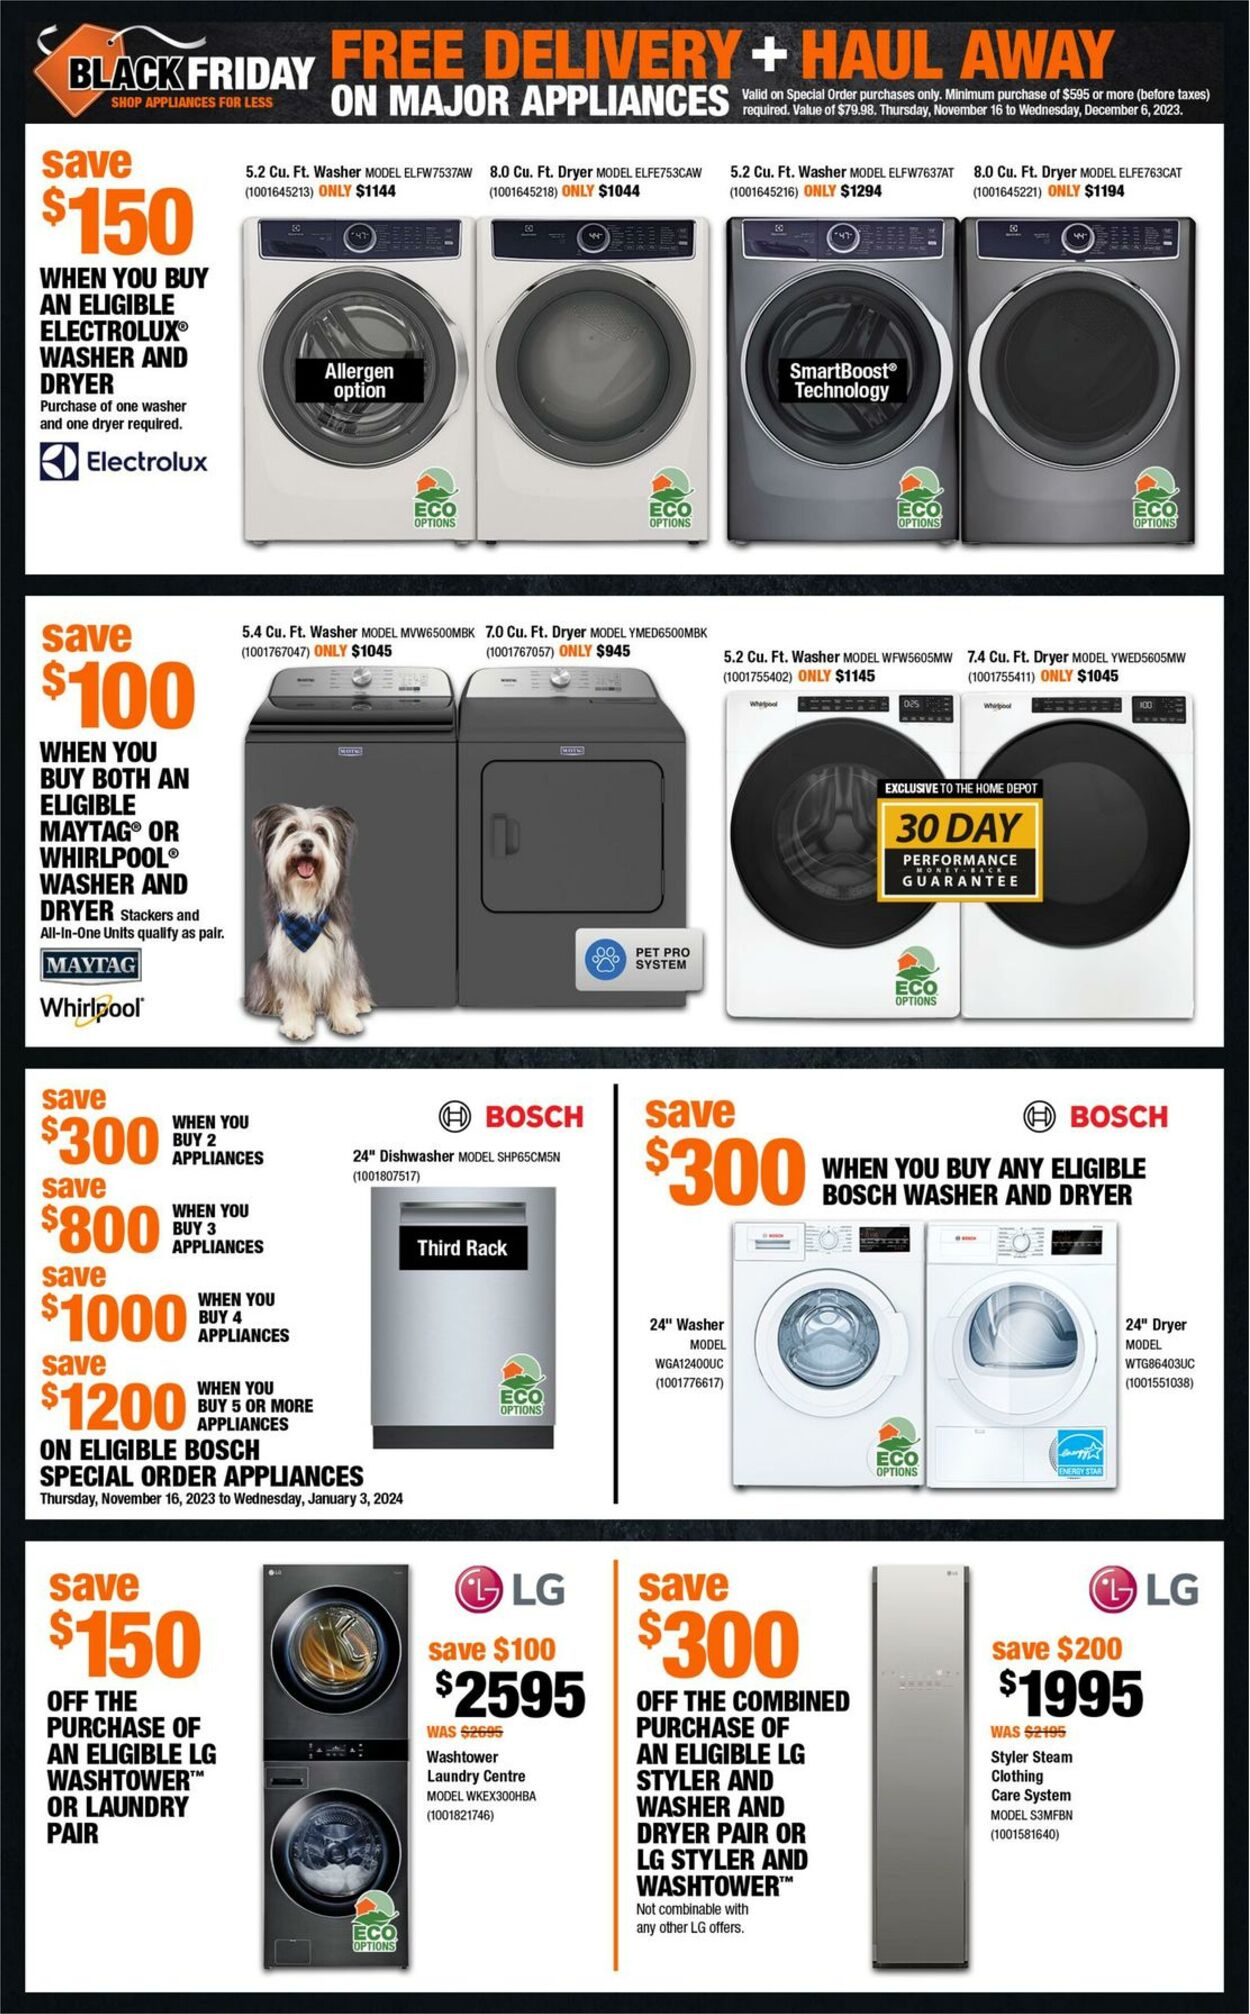 Home Depot Promotional Flyer Black Friday Valid from 16.11 to 22.11